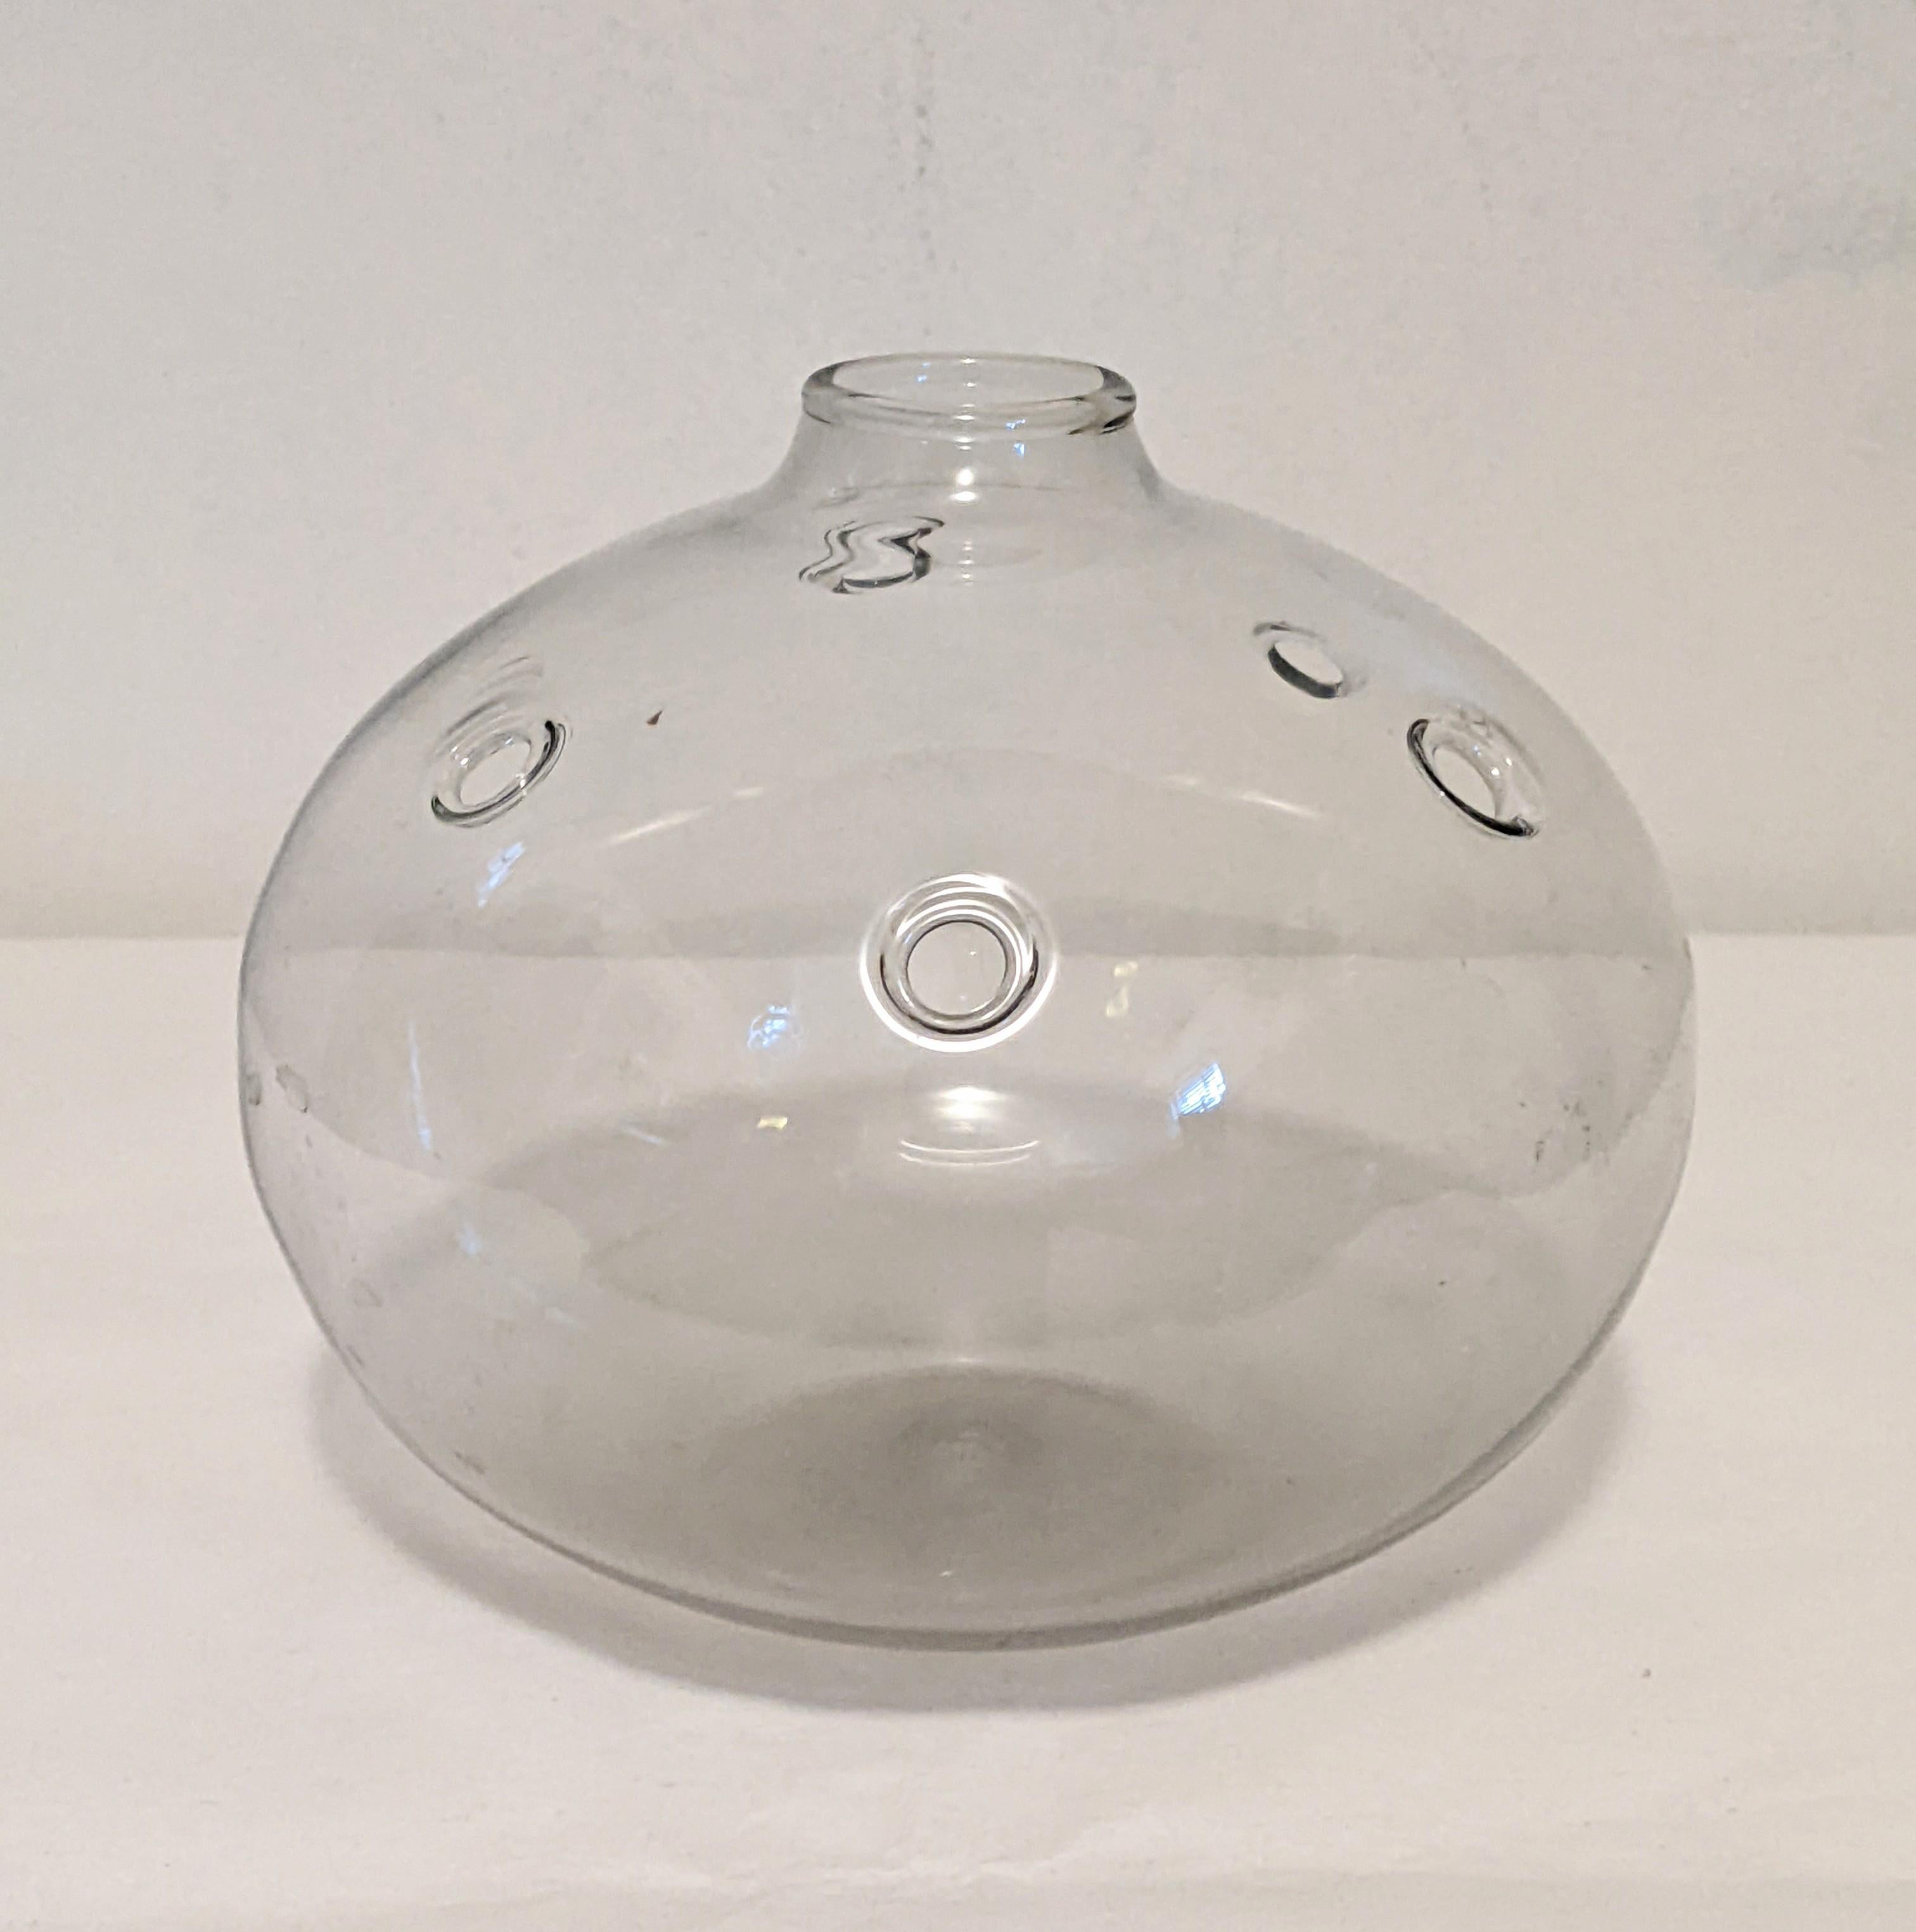 Mouth blown clear glass Hull (hole) vase, designed by Michael Bang for Holmegaard Denmark, 1970s. Produced between 1973-1978.
Vase has multiple holes to place and arrange flowers in the Ikebana style. 
6